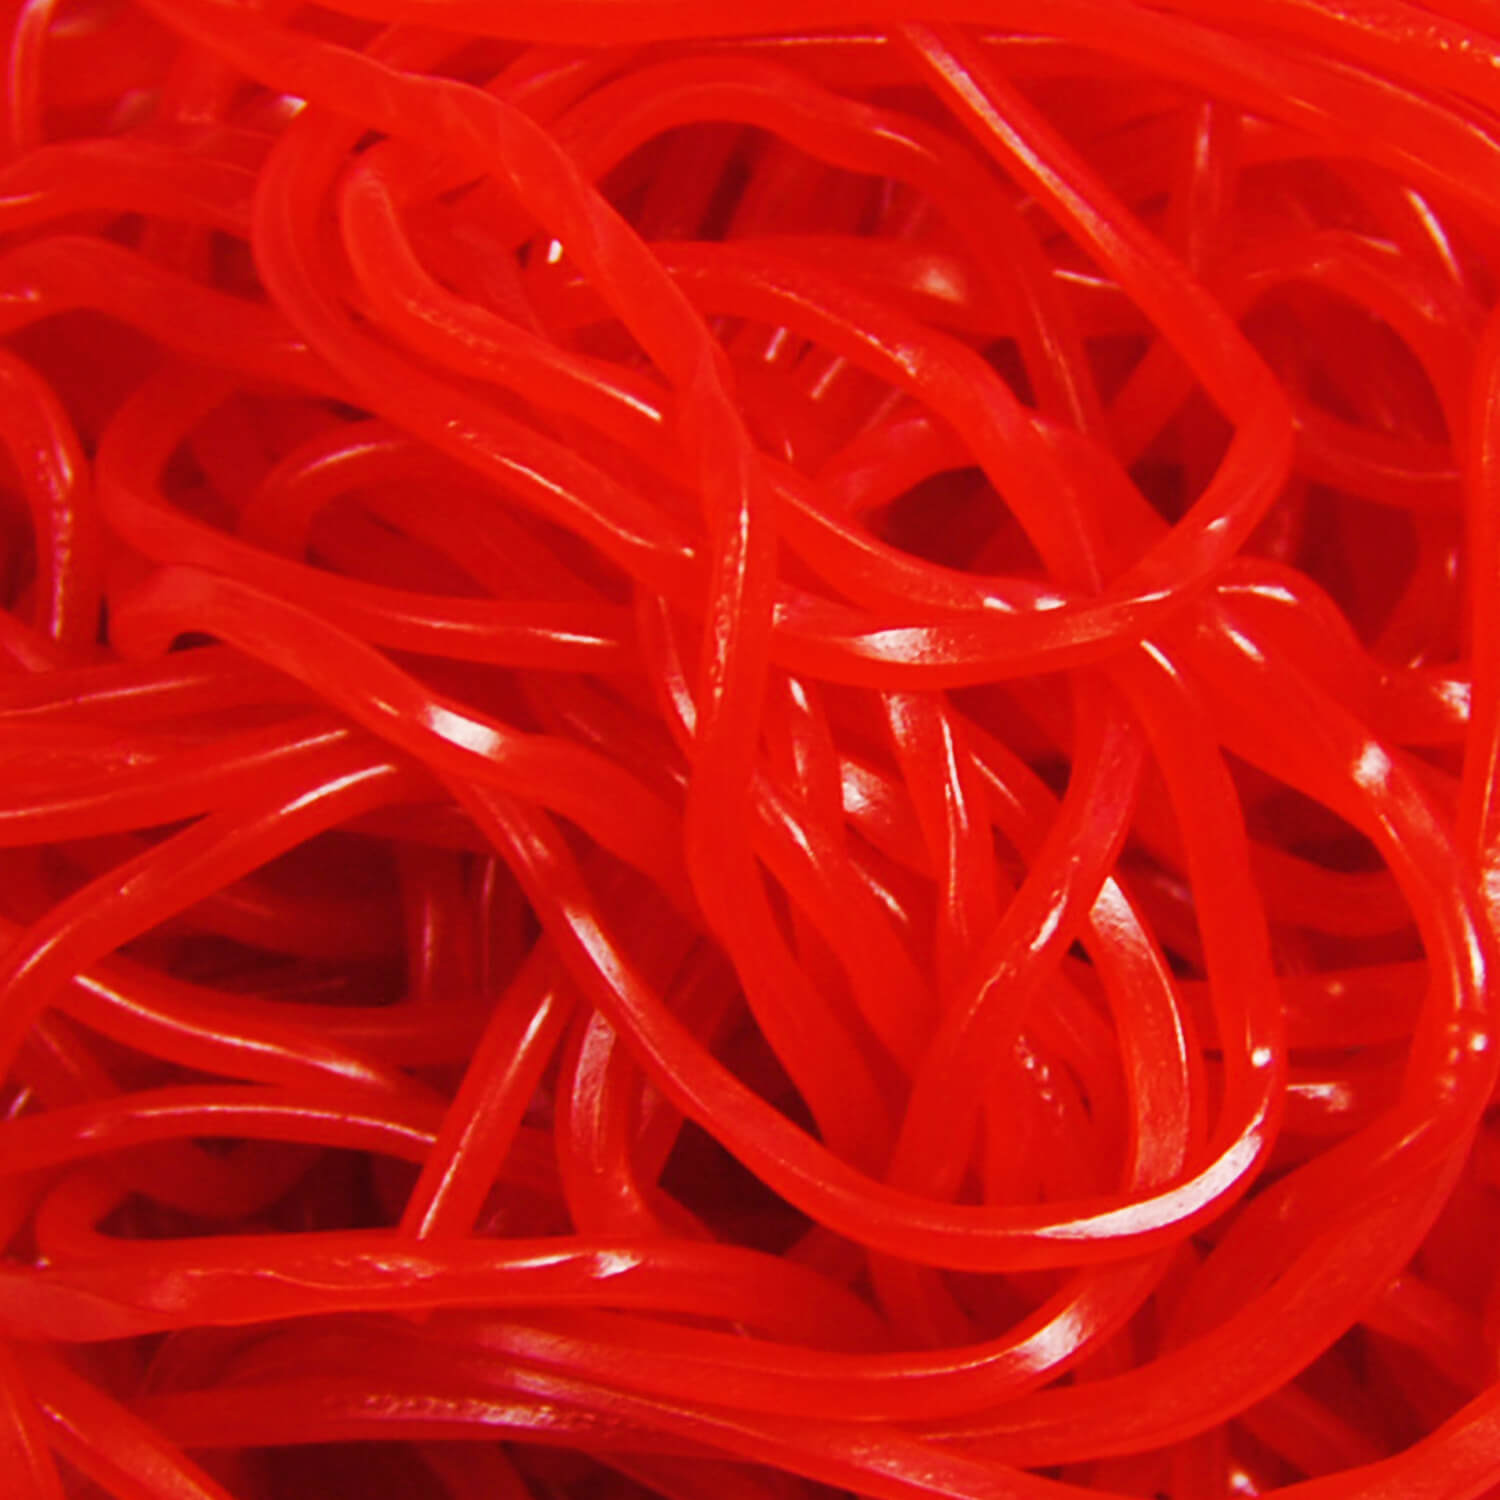 Red licorice laces